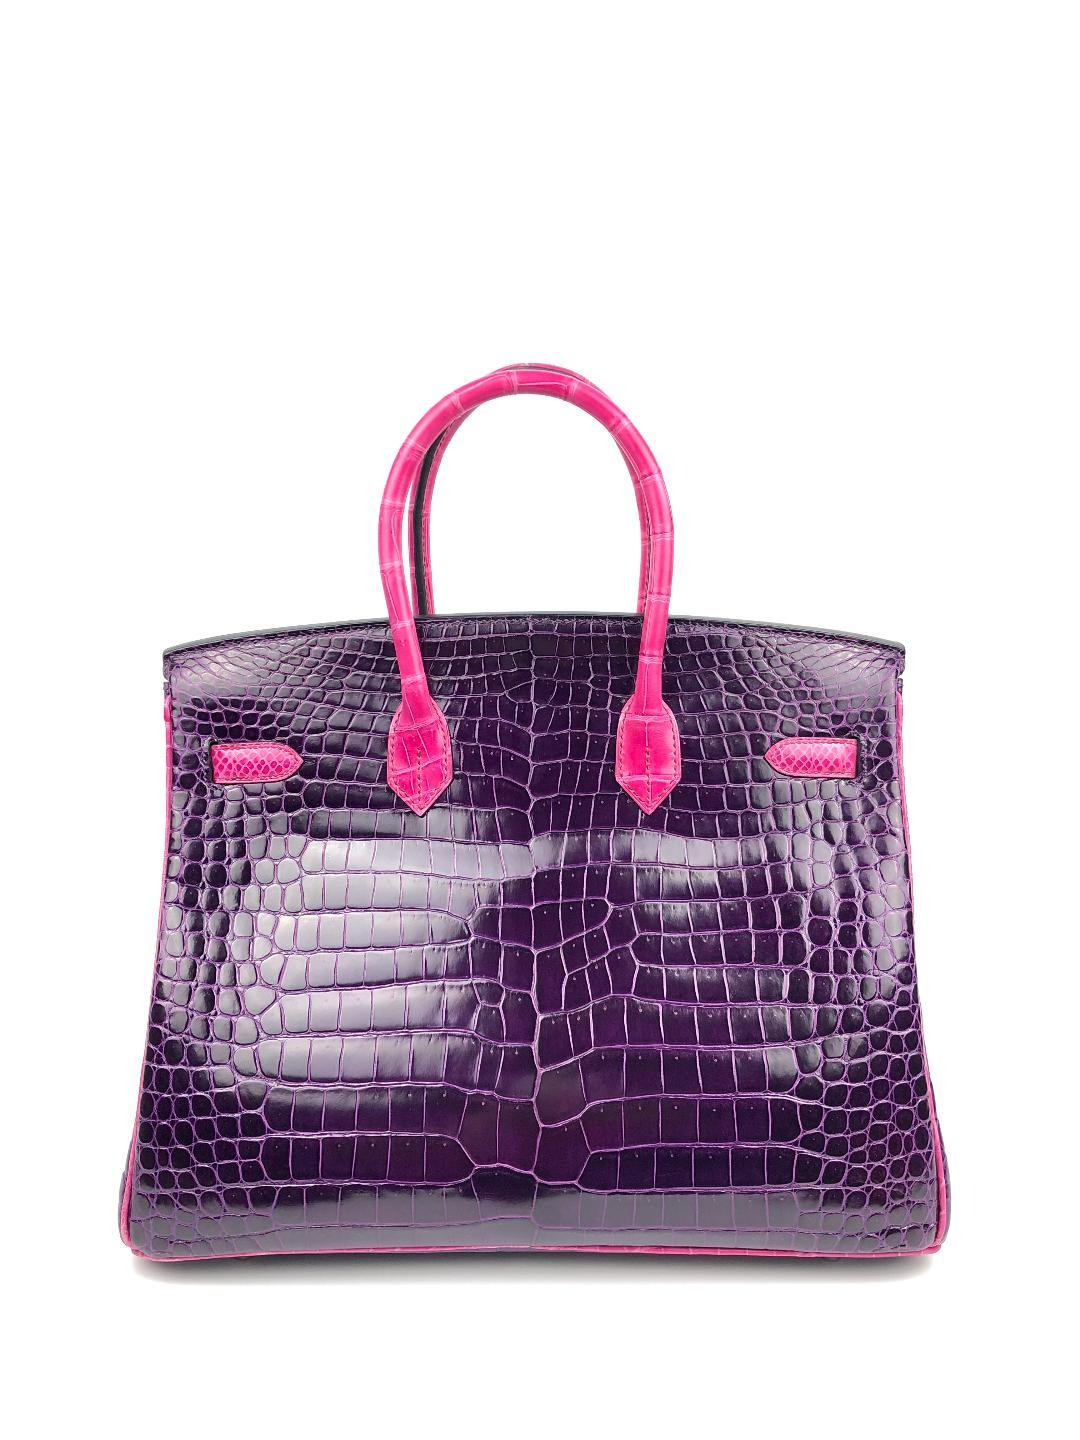 This authentic Hermès Amethyst and Rose Scheherazade Porosus Crocodile 35 cm Birkin is in pristine as new condition with the plastic intact on much of the hardware.   Hermès bags are considered the ultimate luxury item the world over.  Hand stitched